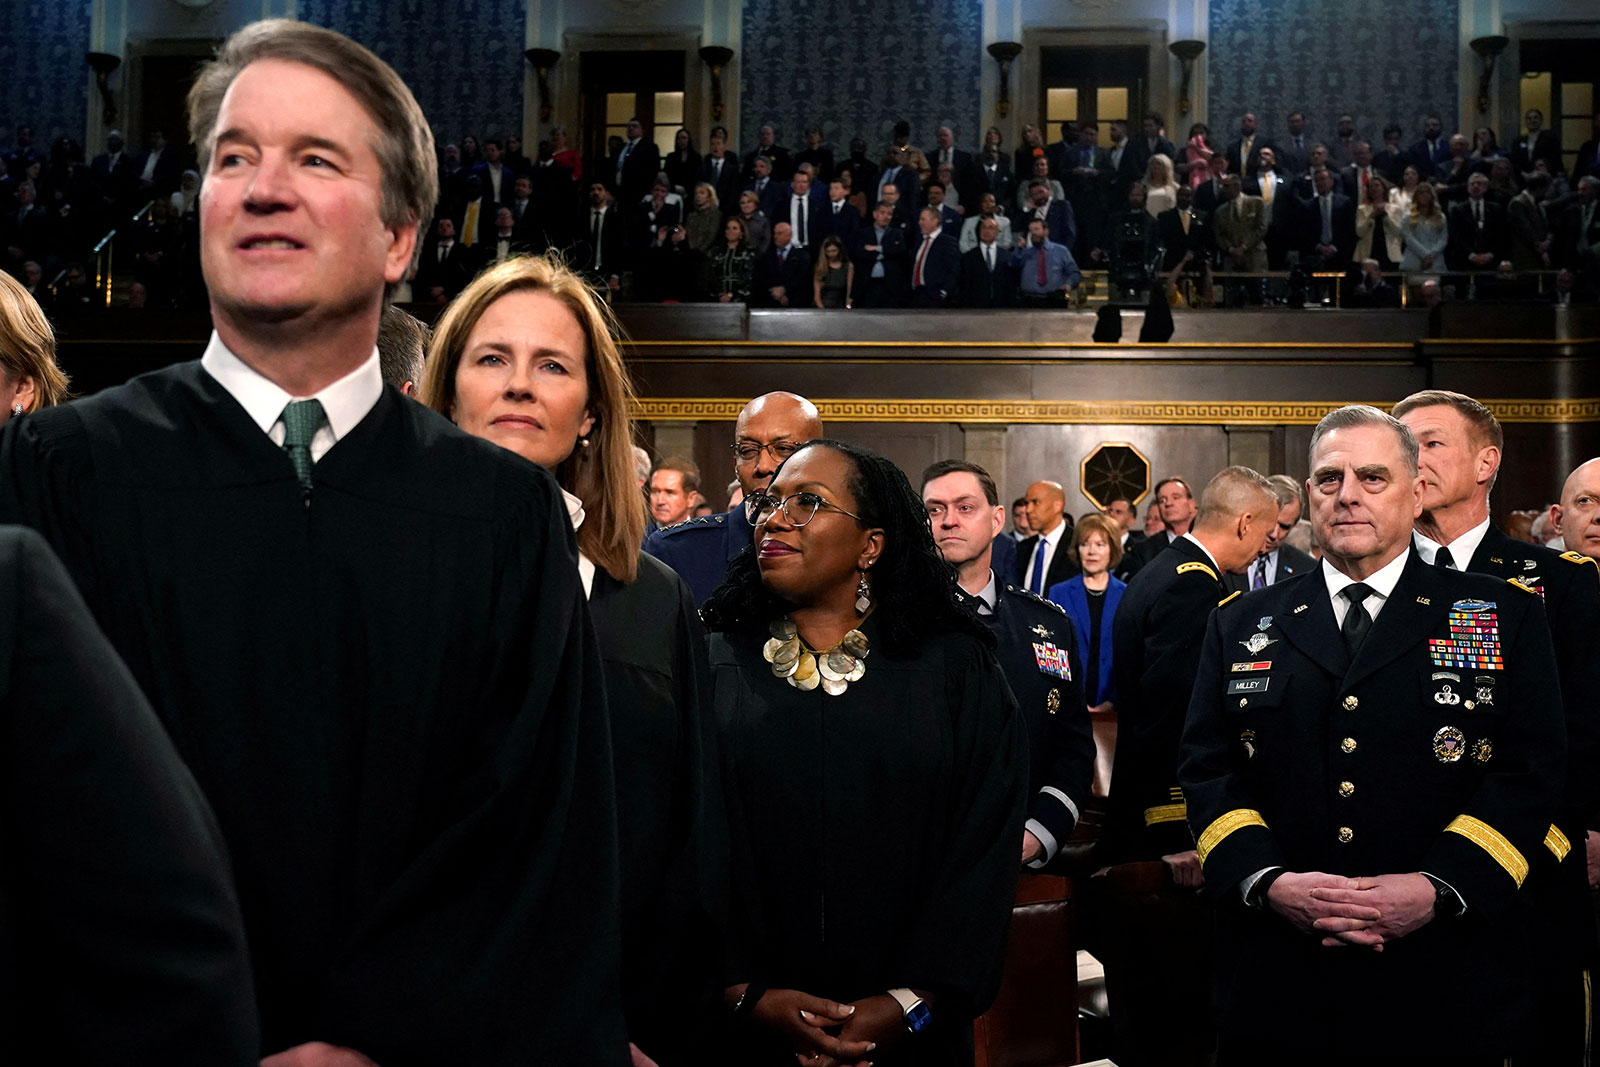 From left, Supreme Court Justices Brett Kavanaugh, Amy Coney Barrett and Ketanji Brown Jackson stand next to Chairman of the Joint Chiefs of Staff Gen. Mark Milley.